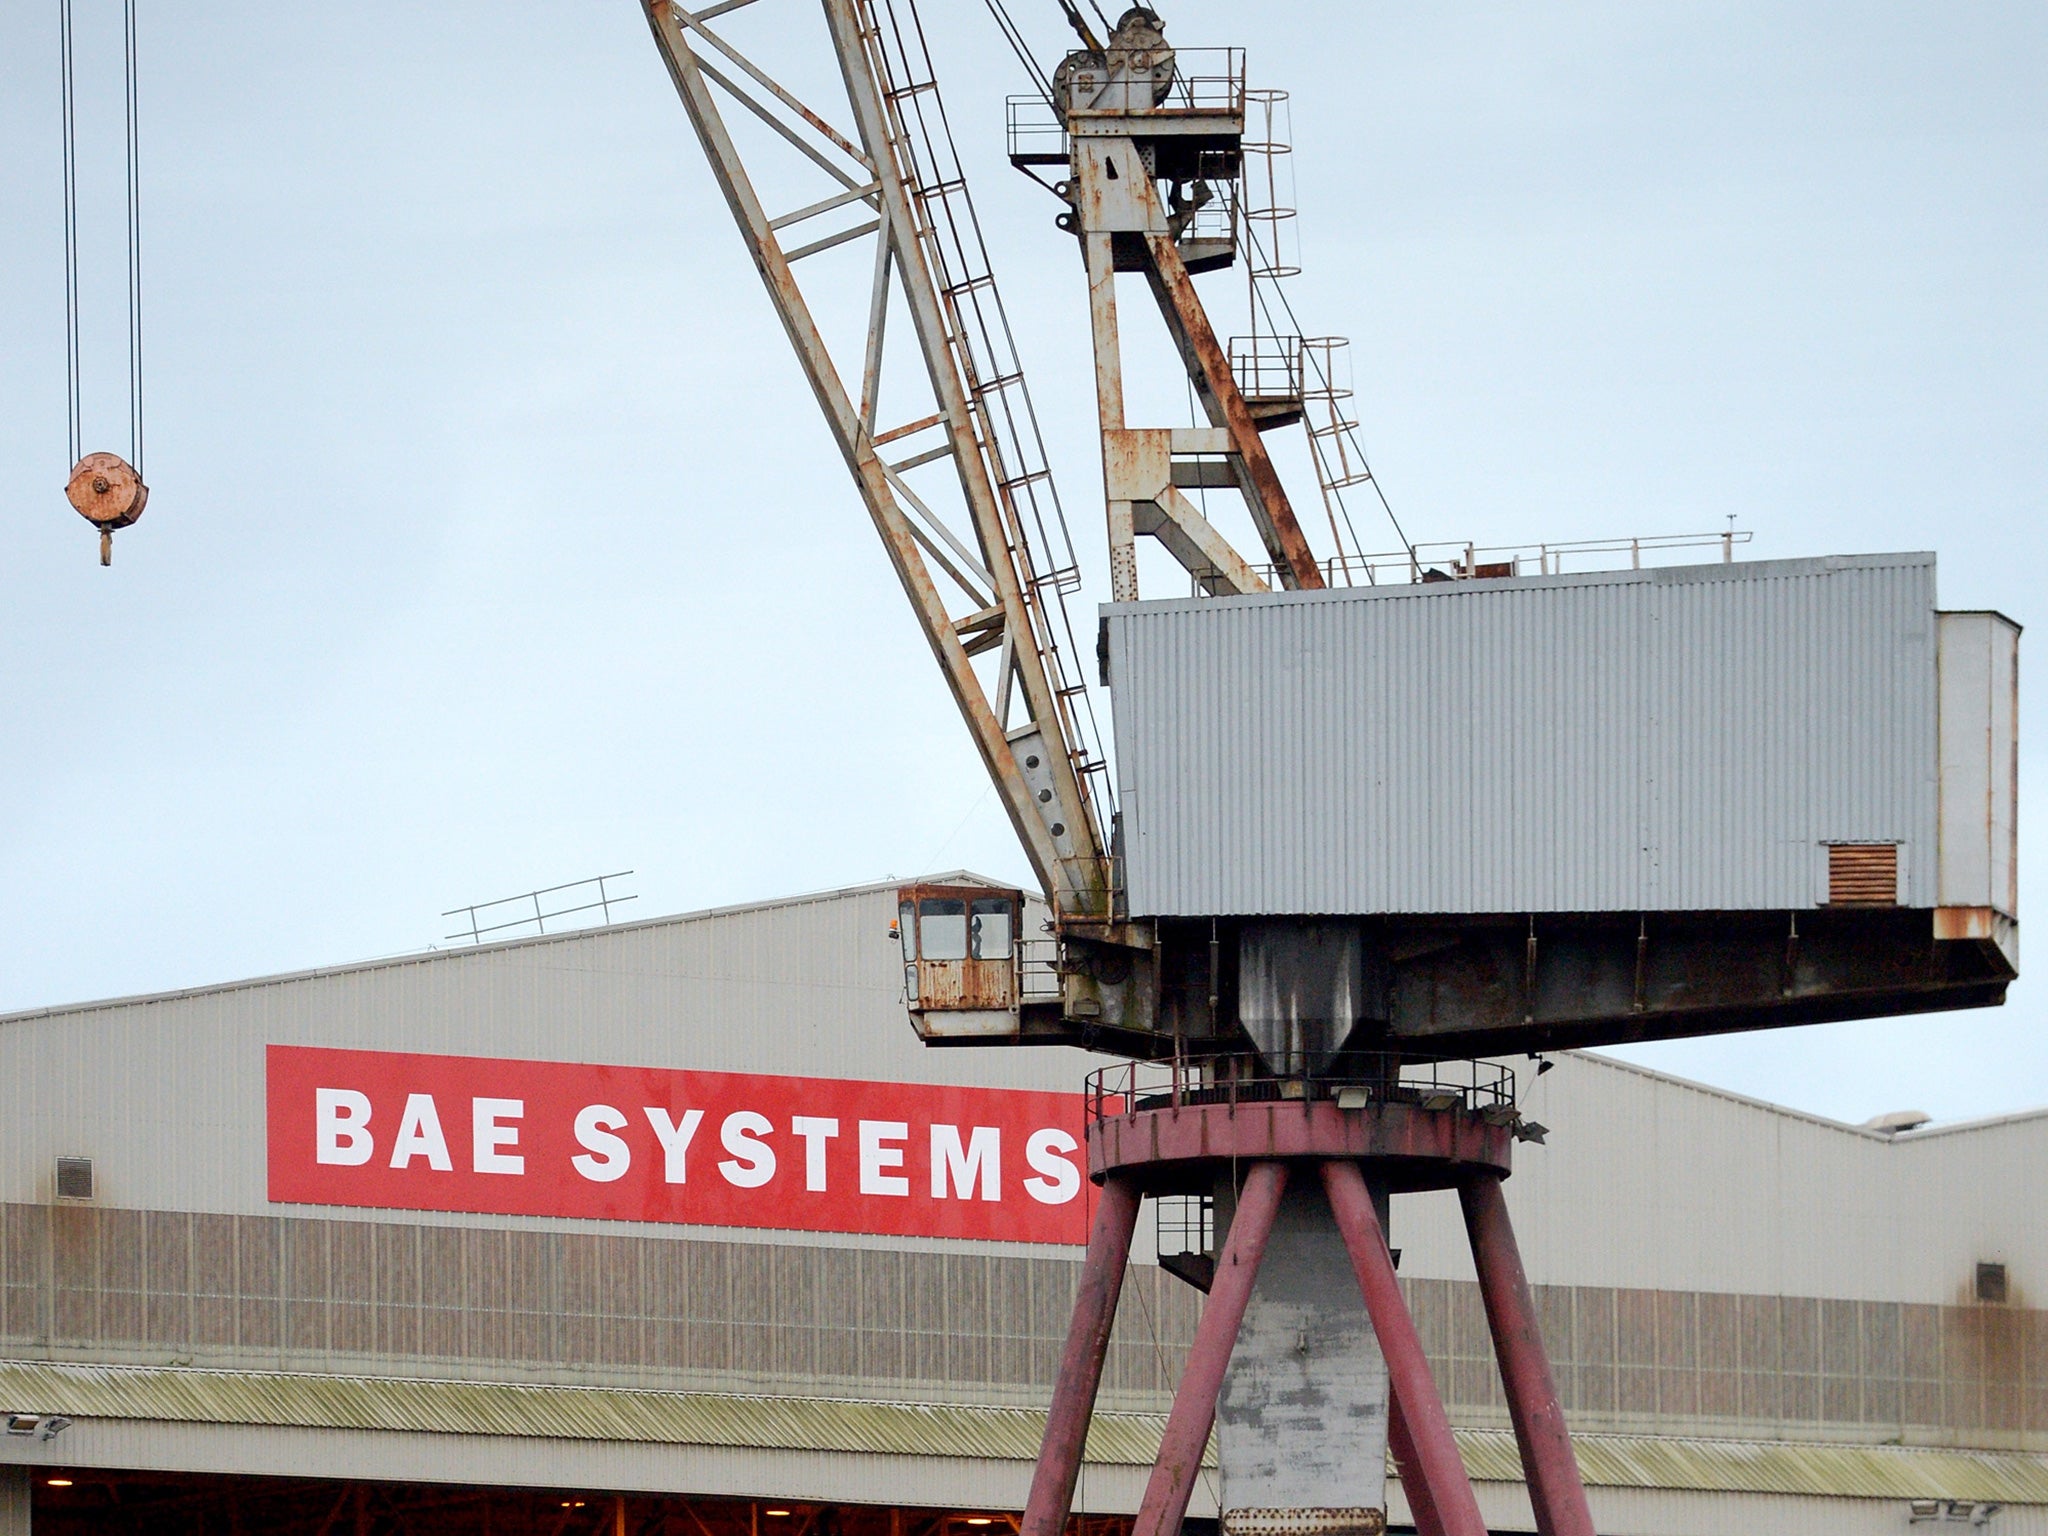 BAE Systems: The defence contractor is celebrating a big order for frigates from Australia